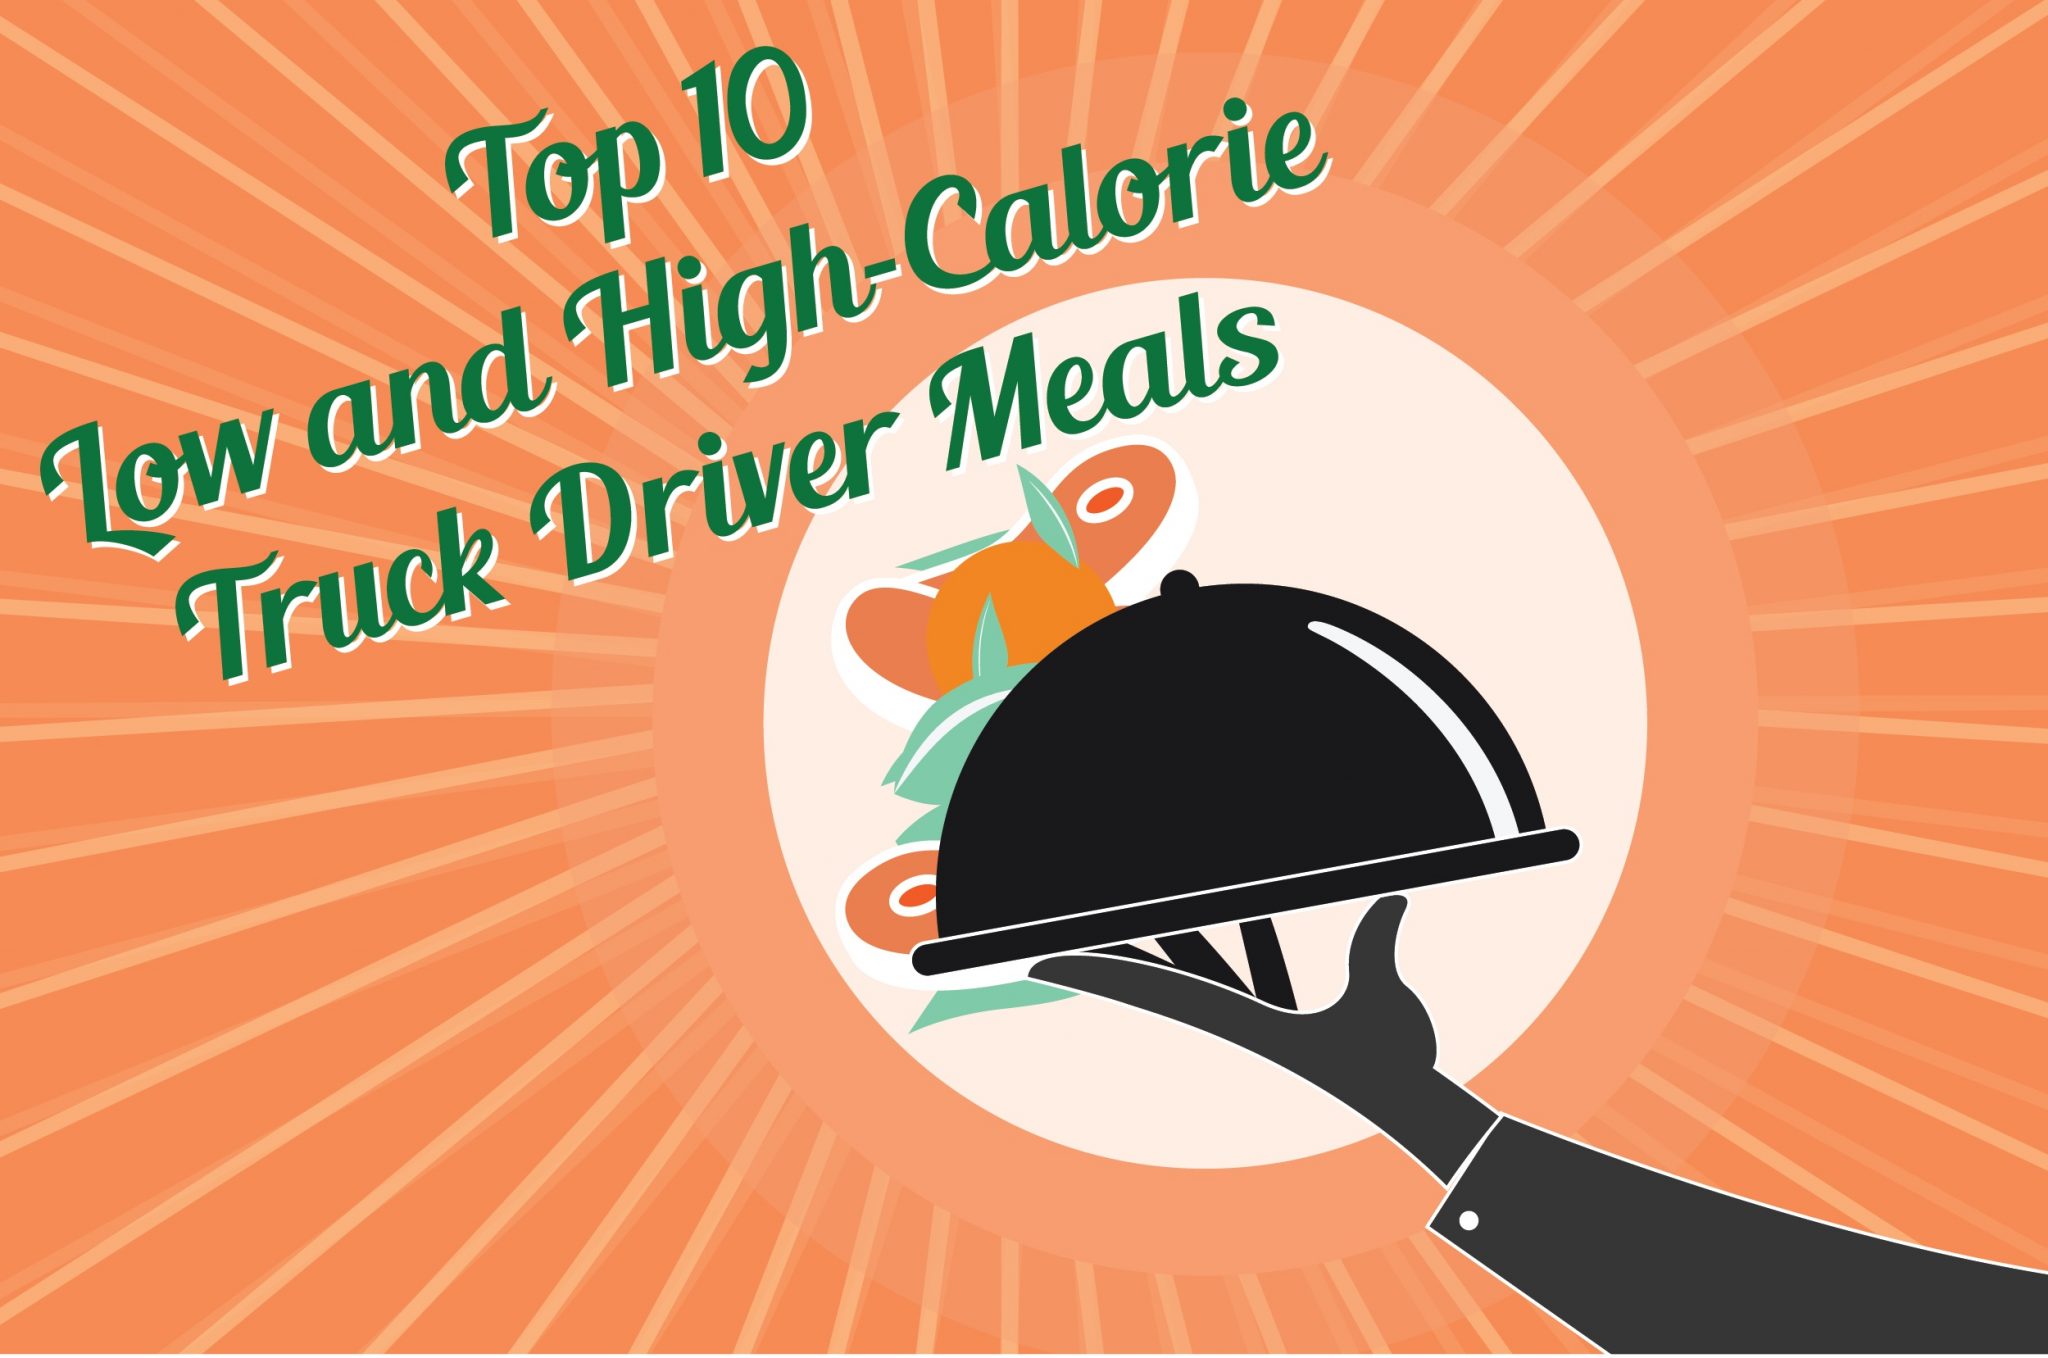 INFOGRAPHIC: Top 10 Low and High-Calorie Truck Driver Meals